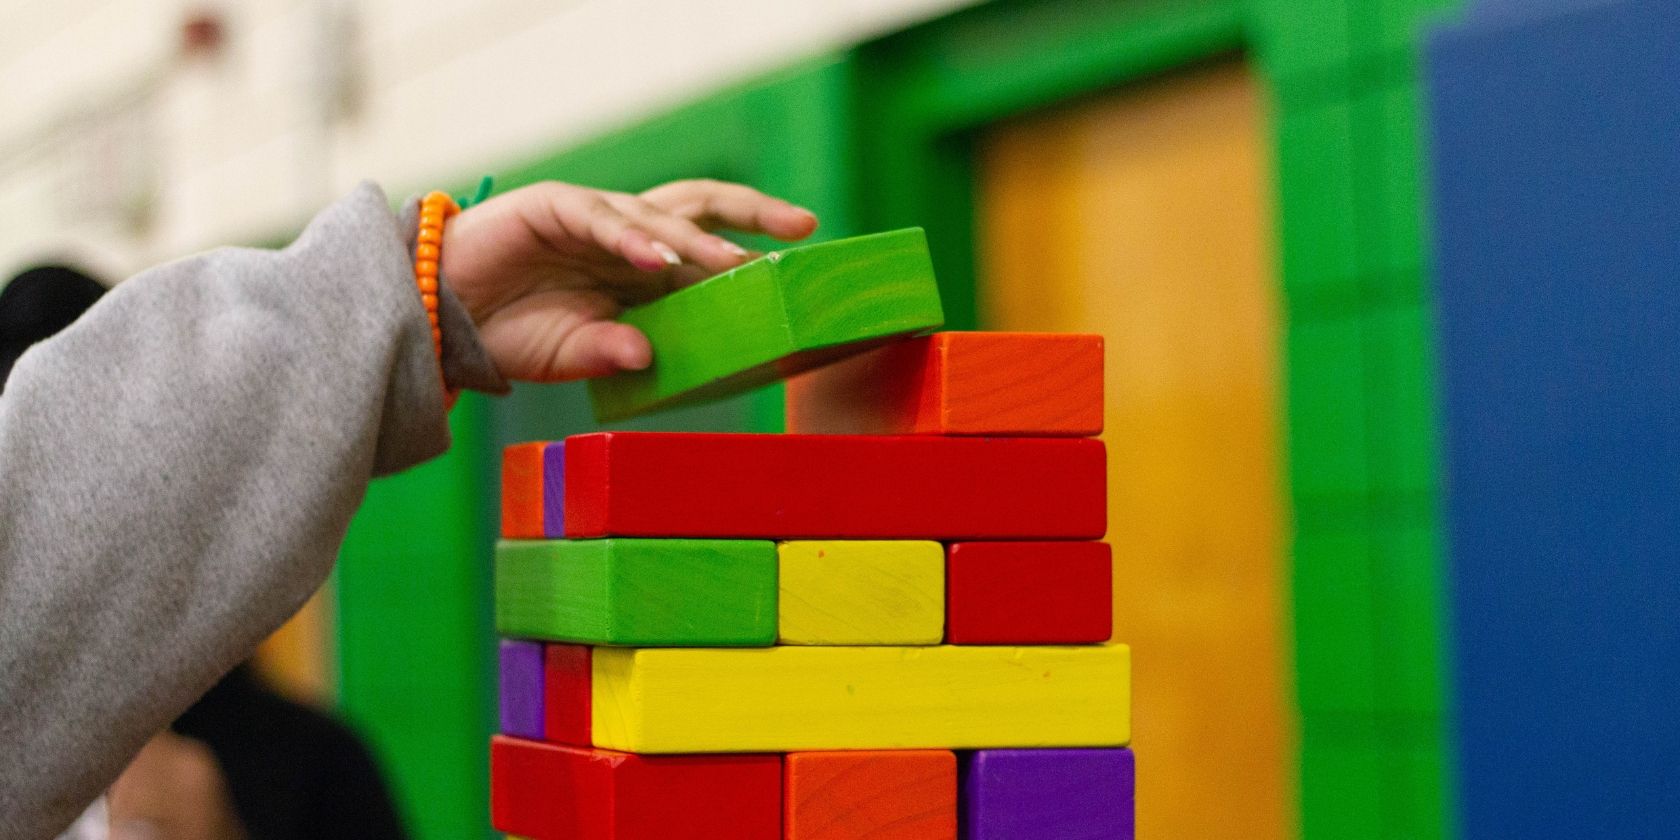 colourful stack of blocks